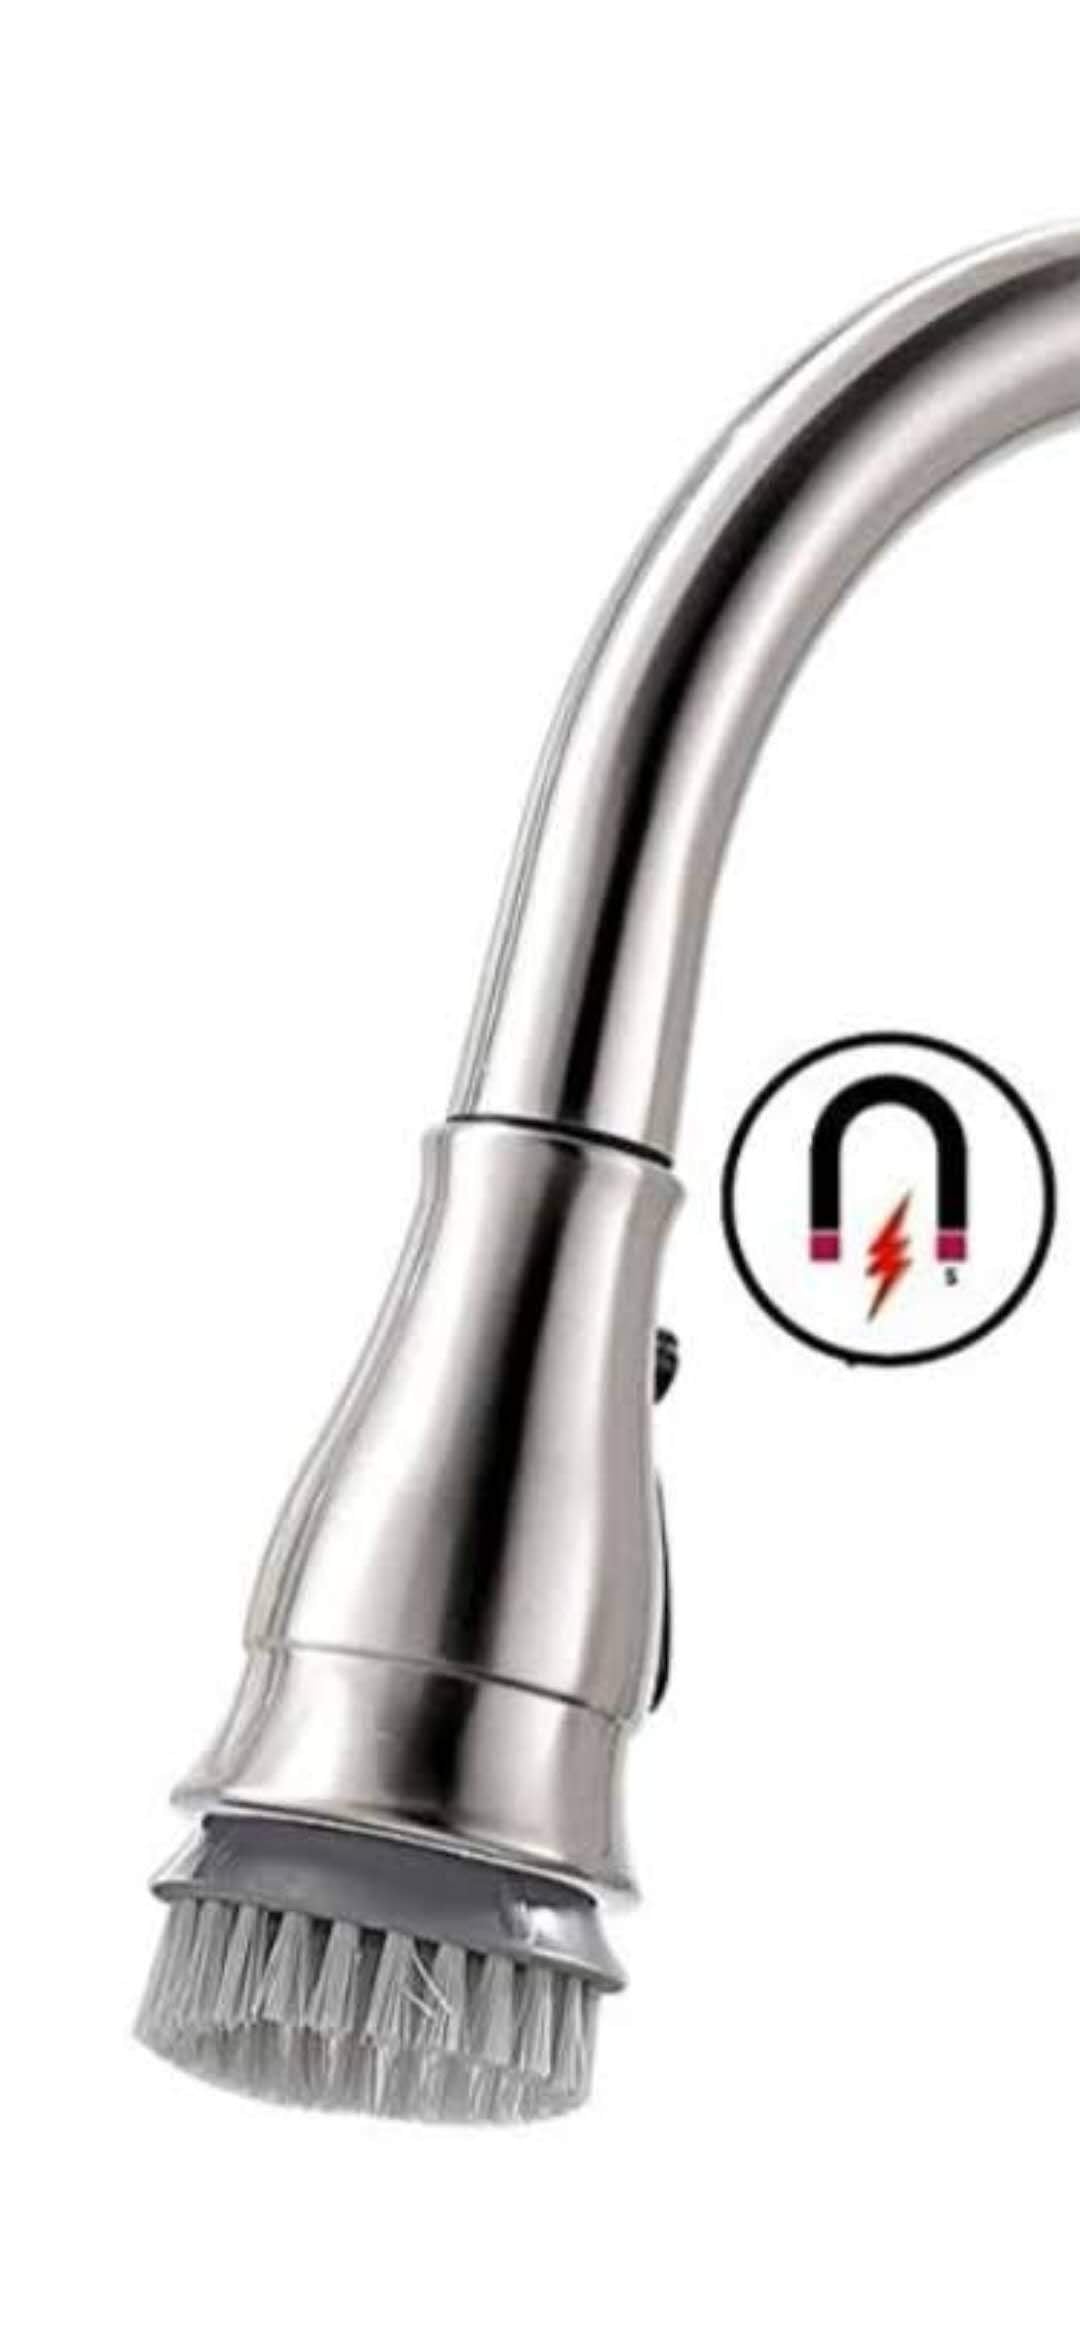 APS150TL Infrared Motion Senor Hands-Free Kitchen Faucet with brush and soap bottle